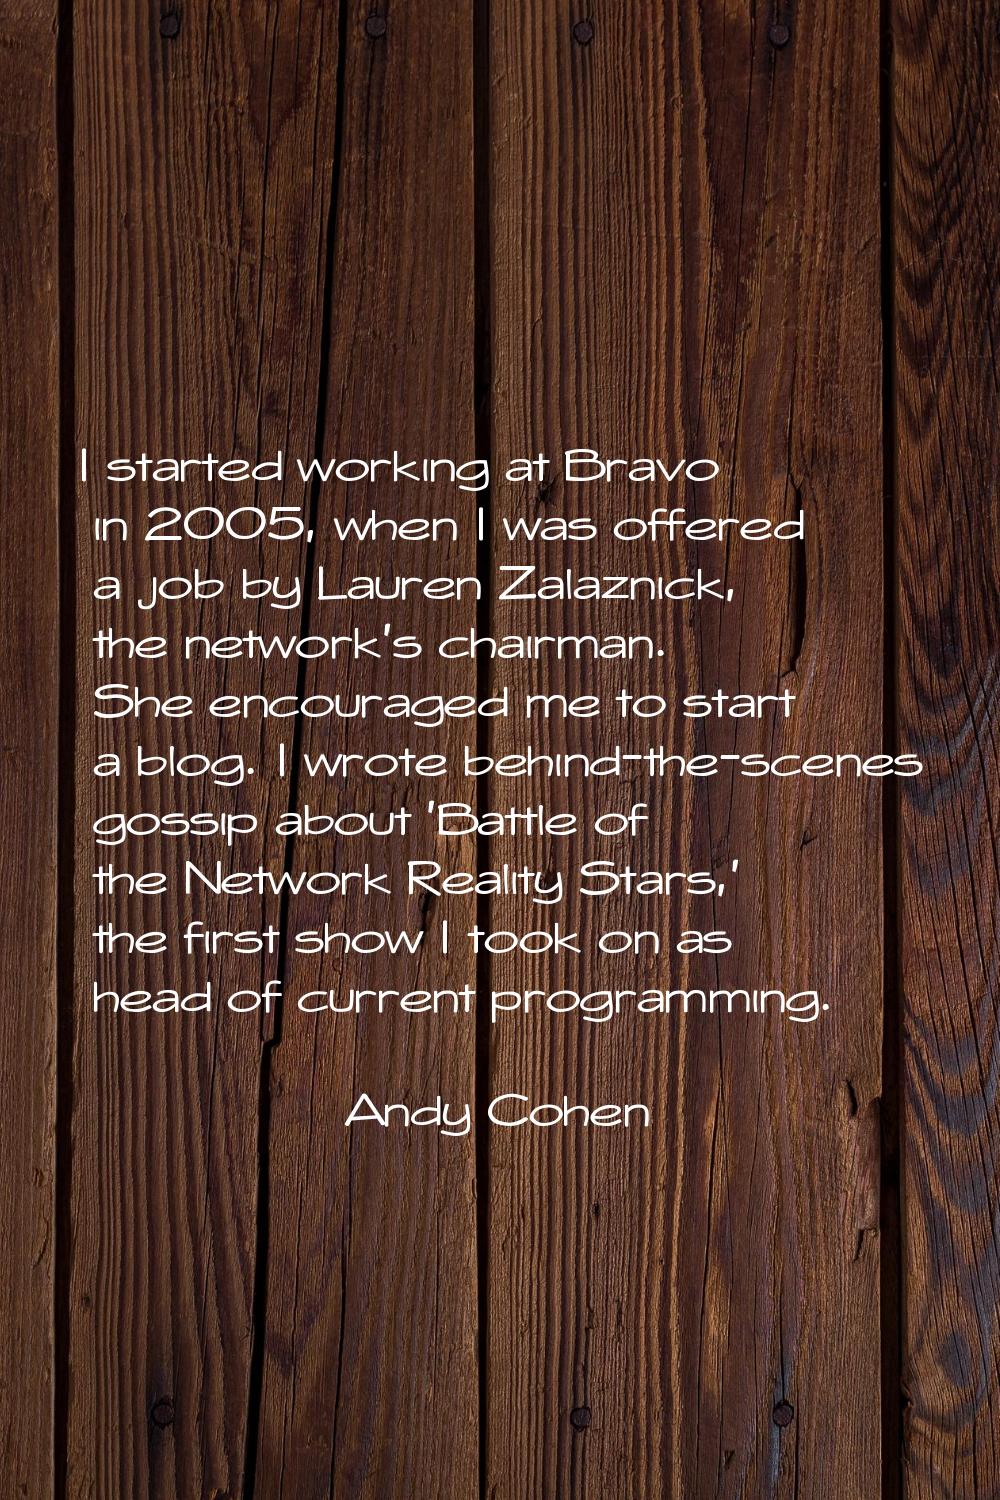 I started working at Bravo in 2005, when I was offered a job by Lauren Zalaznick, the network's cha